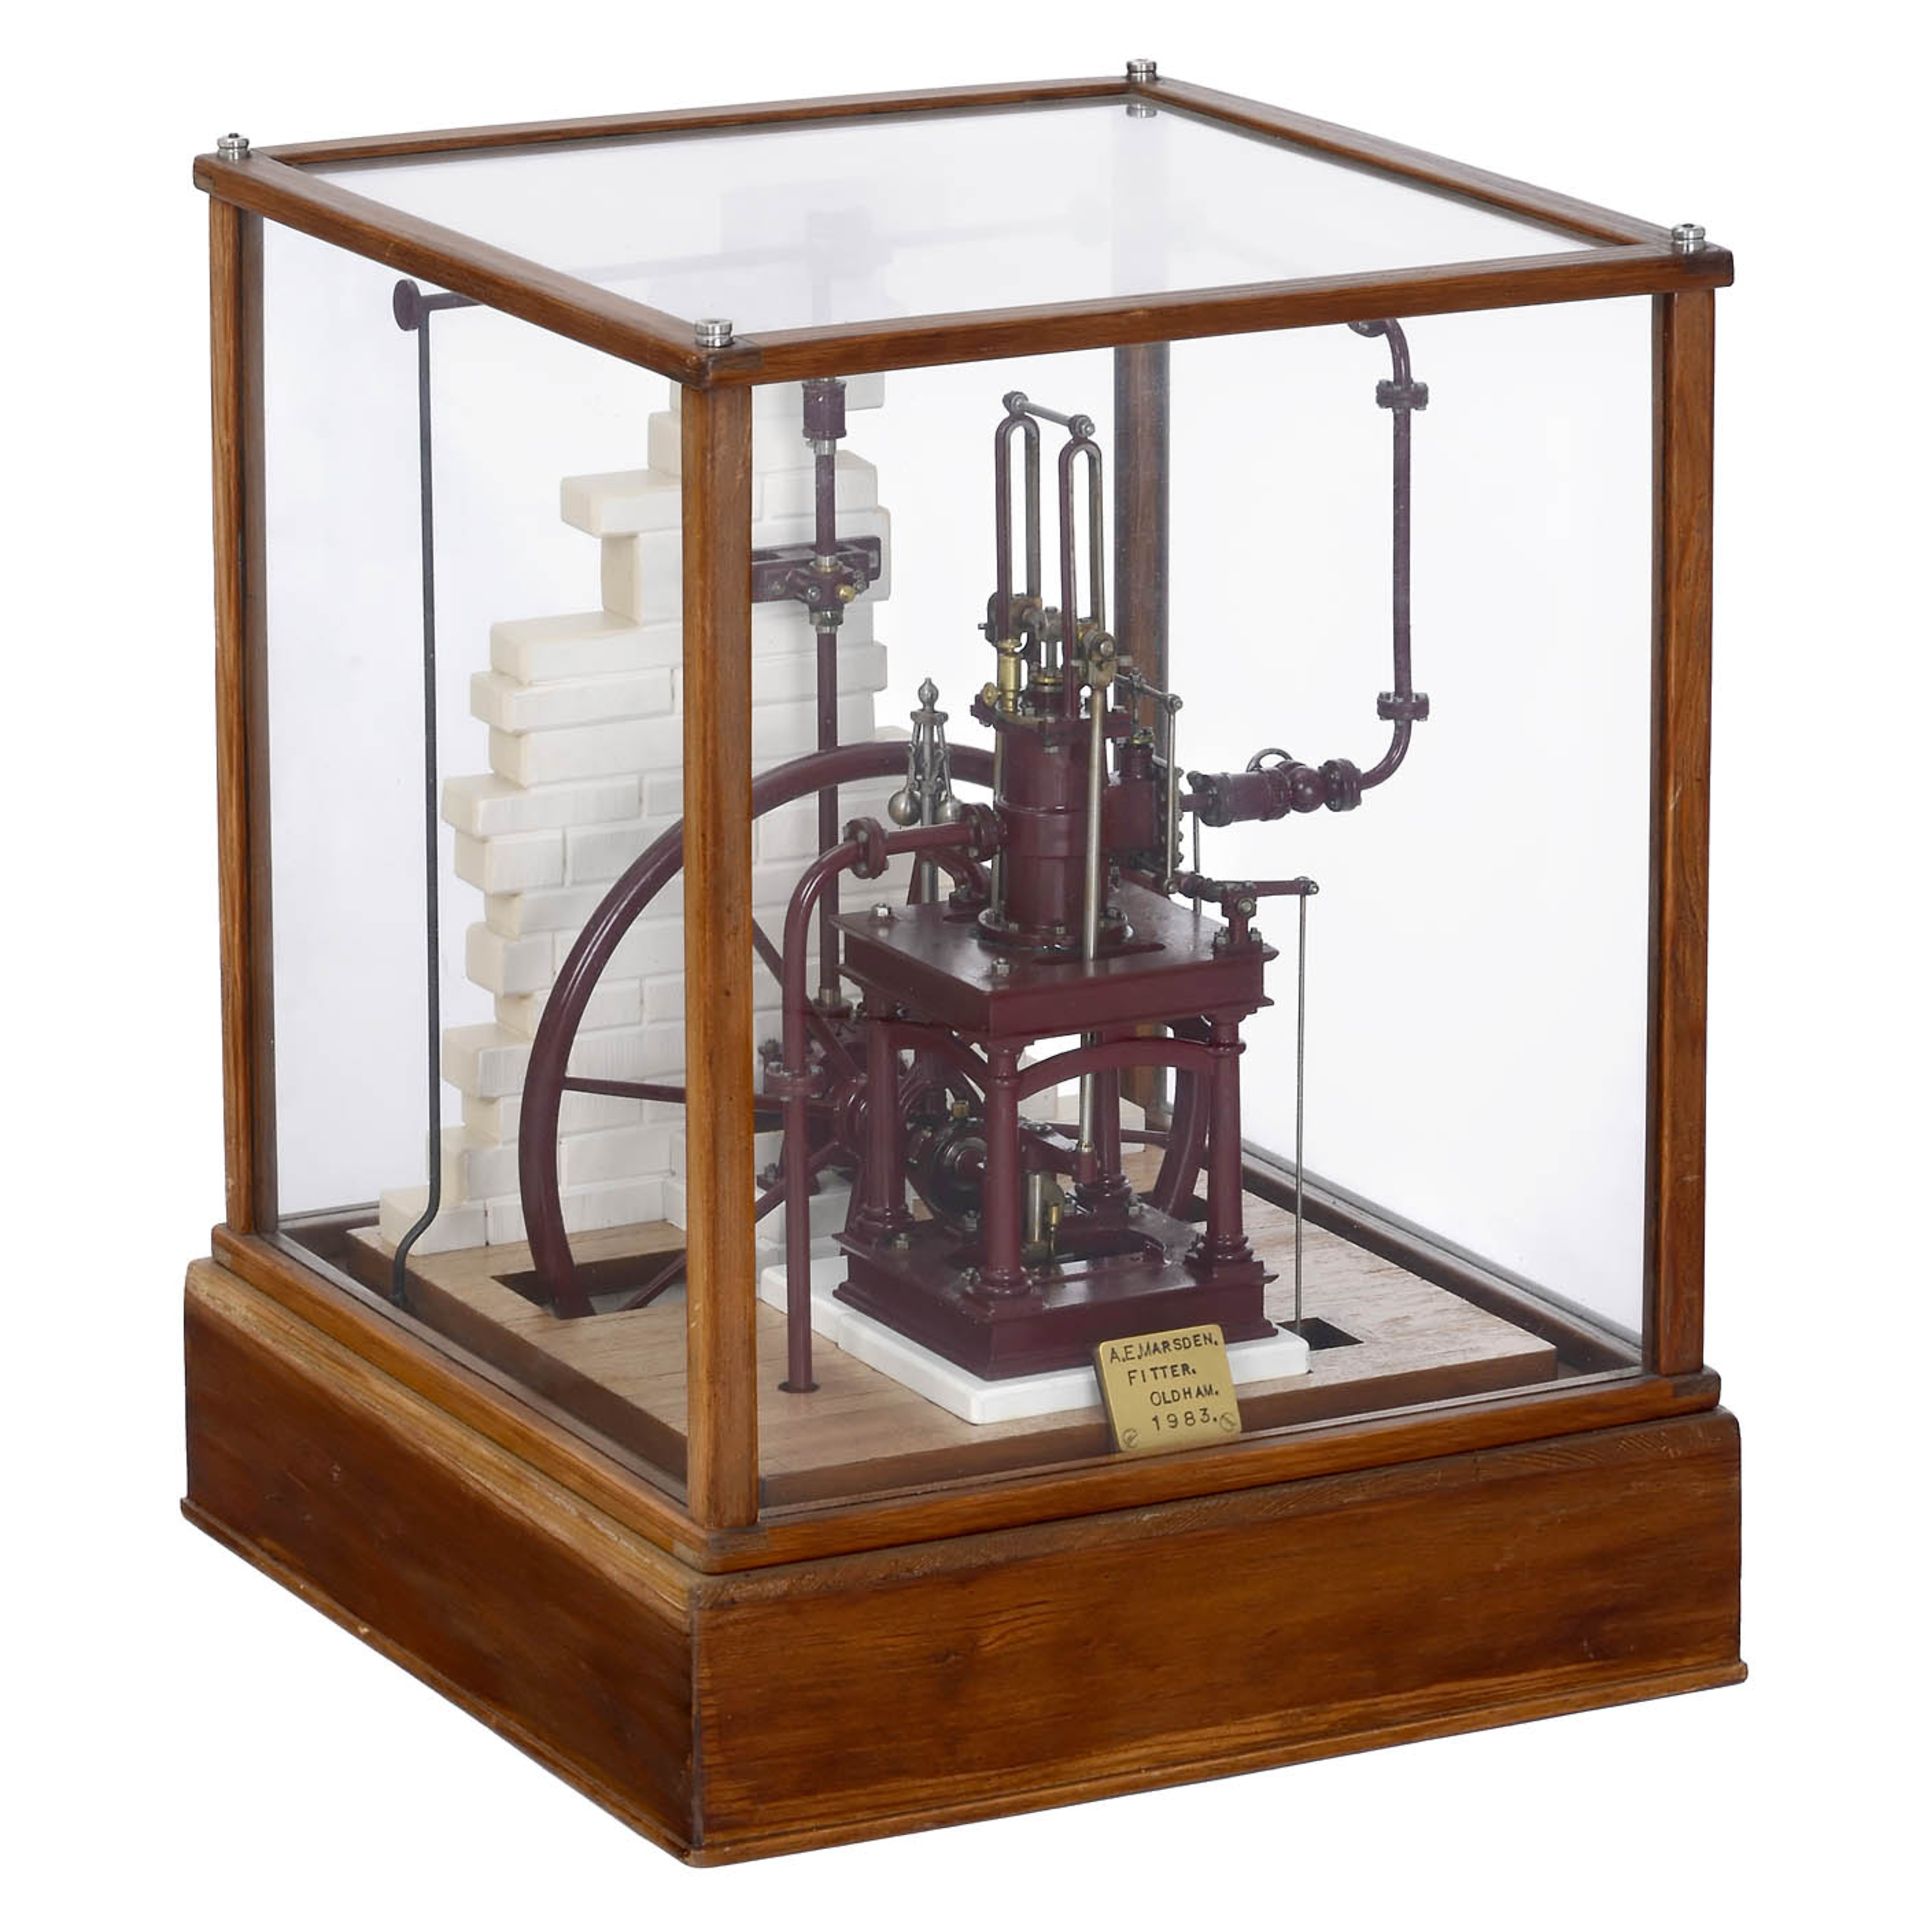 Working Model of a Napier Four-Pillar Table Steam Engine, 1983